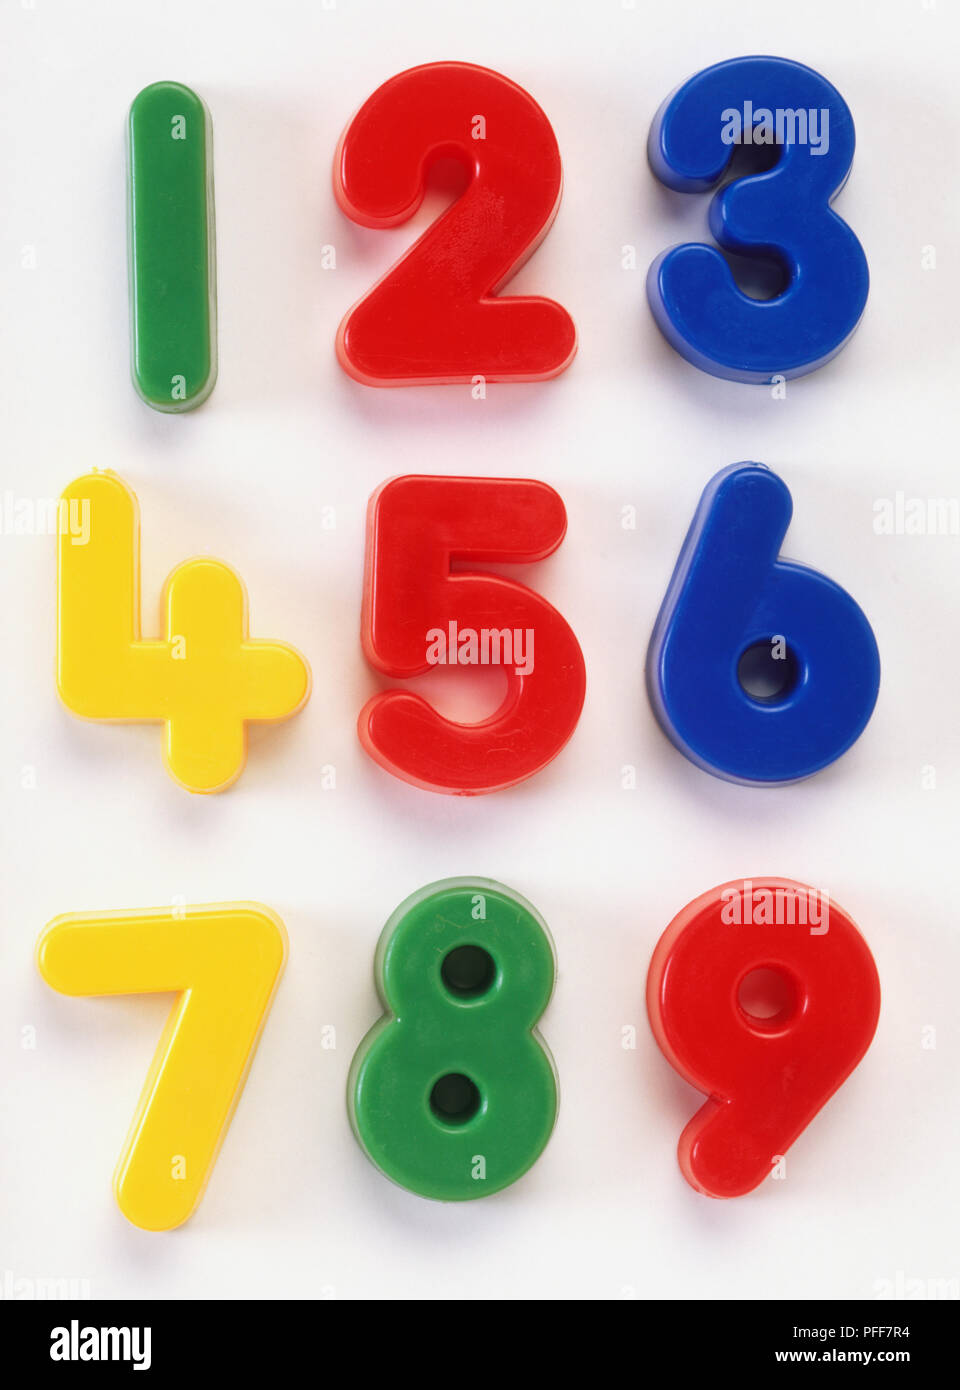 Plastic numbers 1, 2, 3, 4, 5, 6, 7, 8, 9, close up. Stock Photo